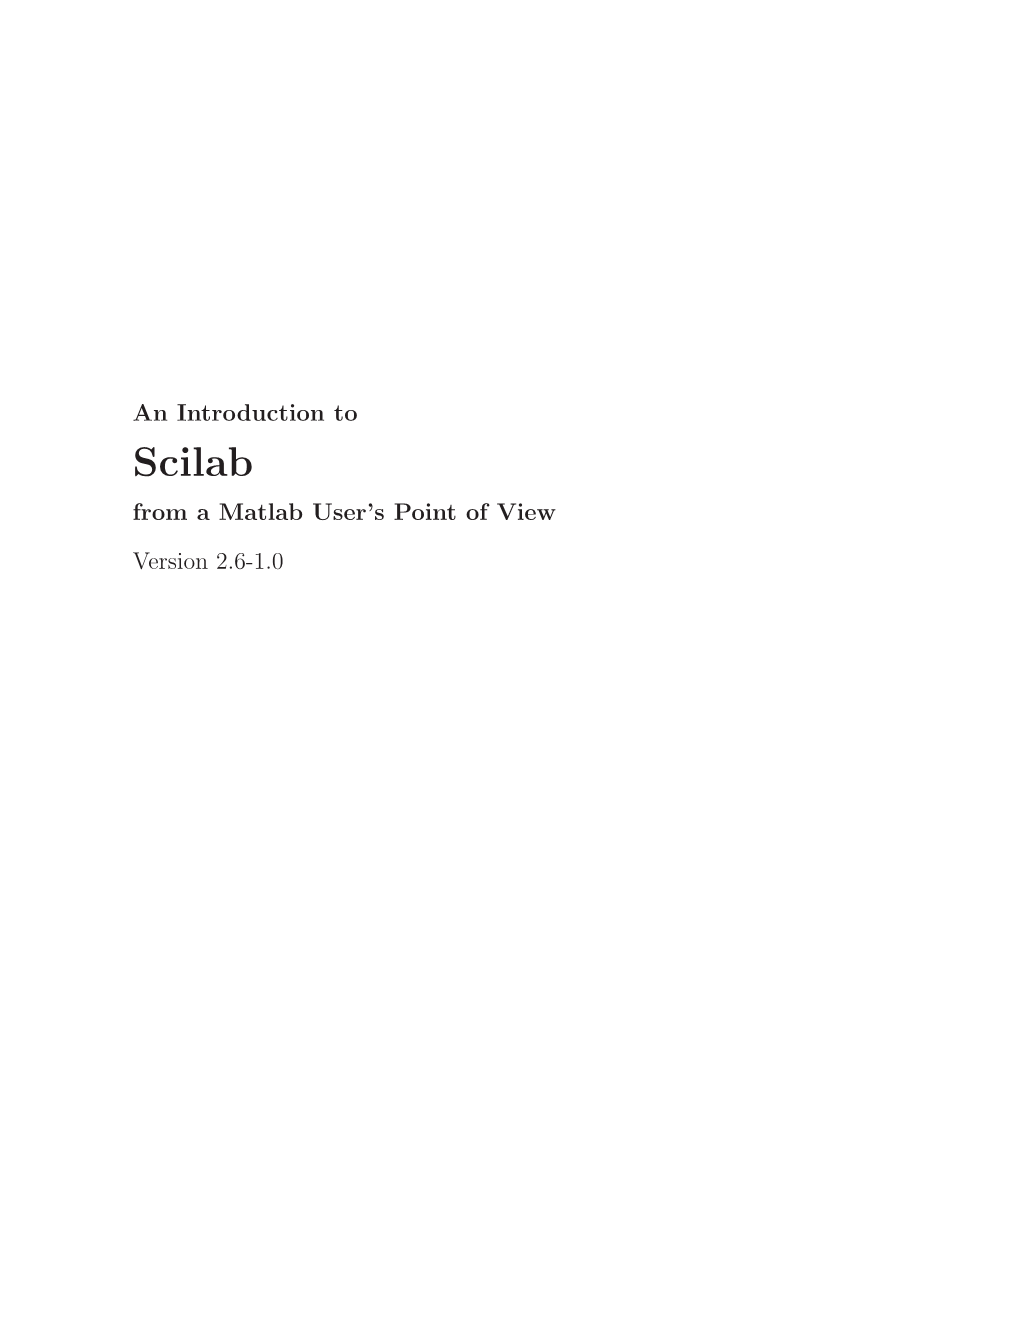 Scilab from a Matlab User’S Point of View